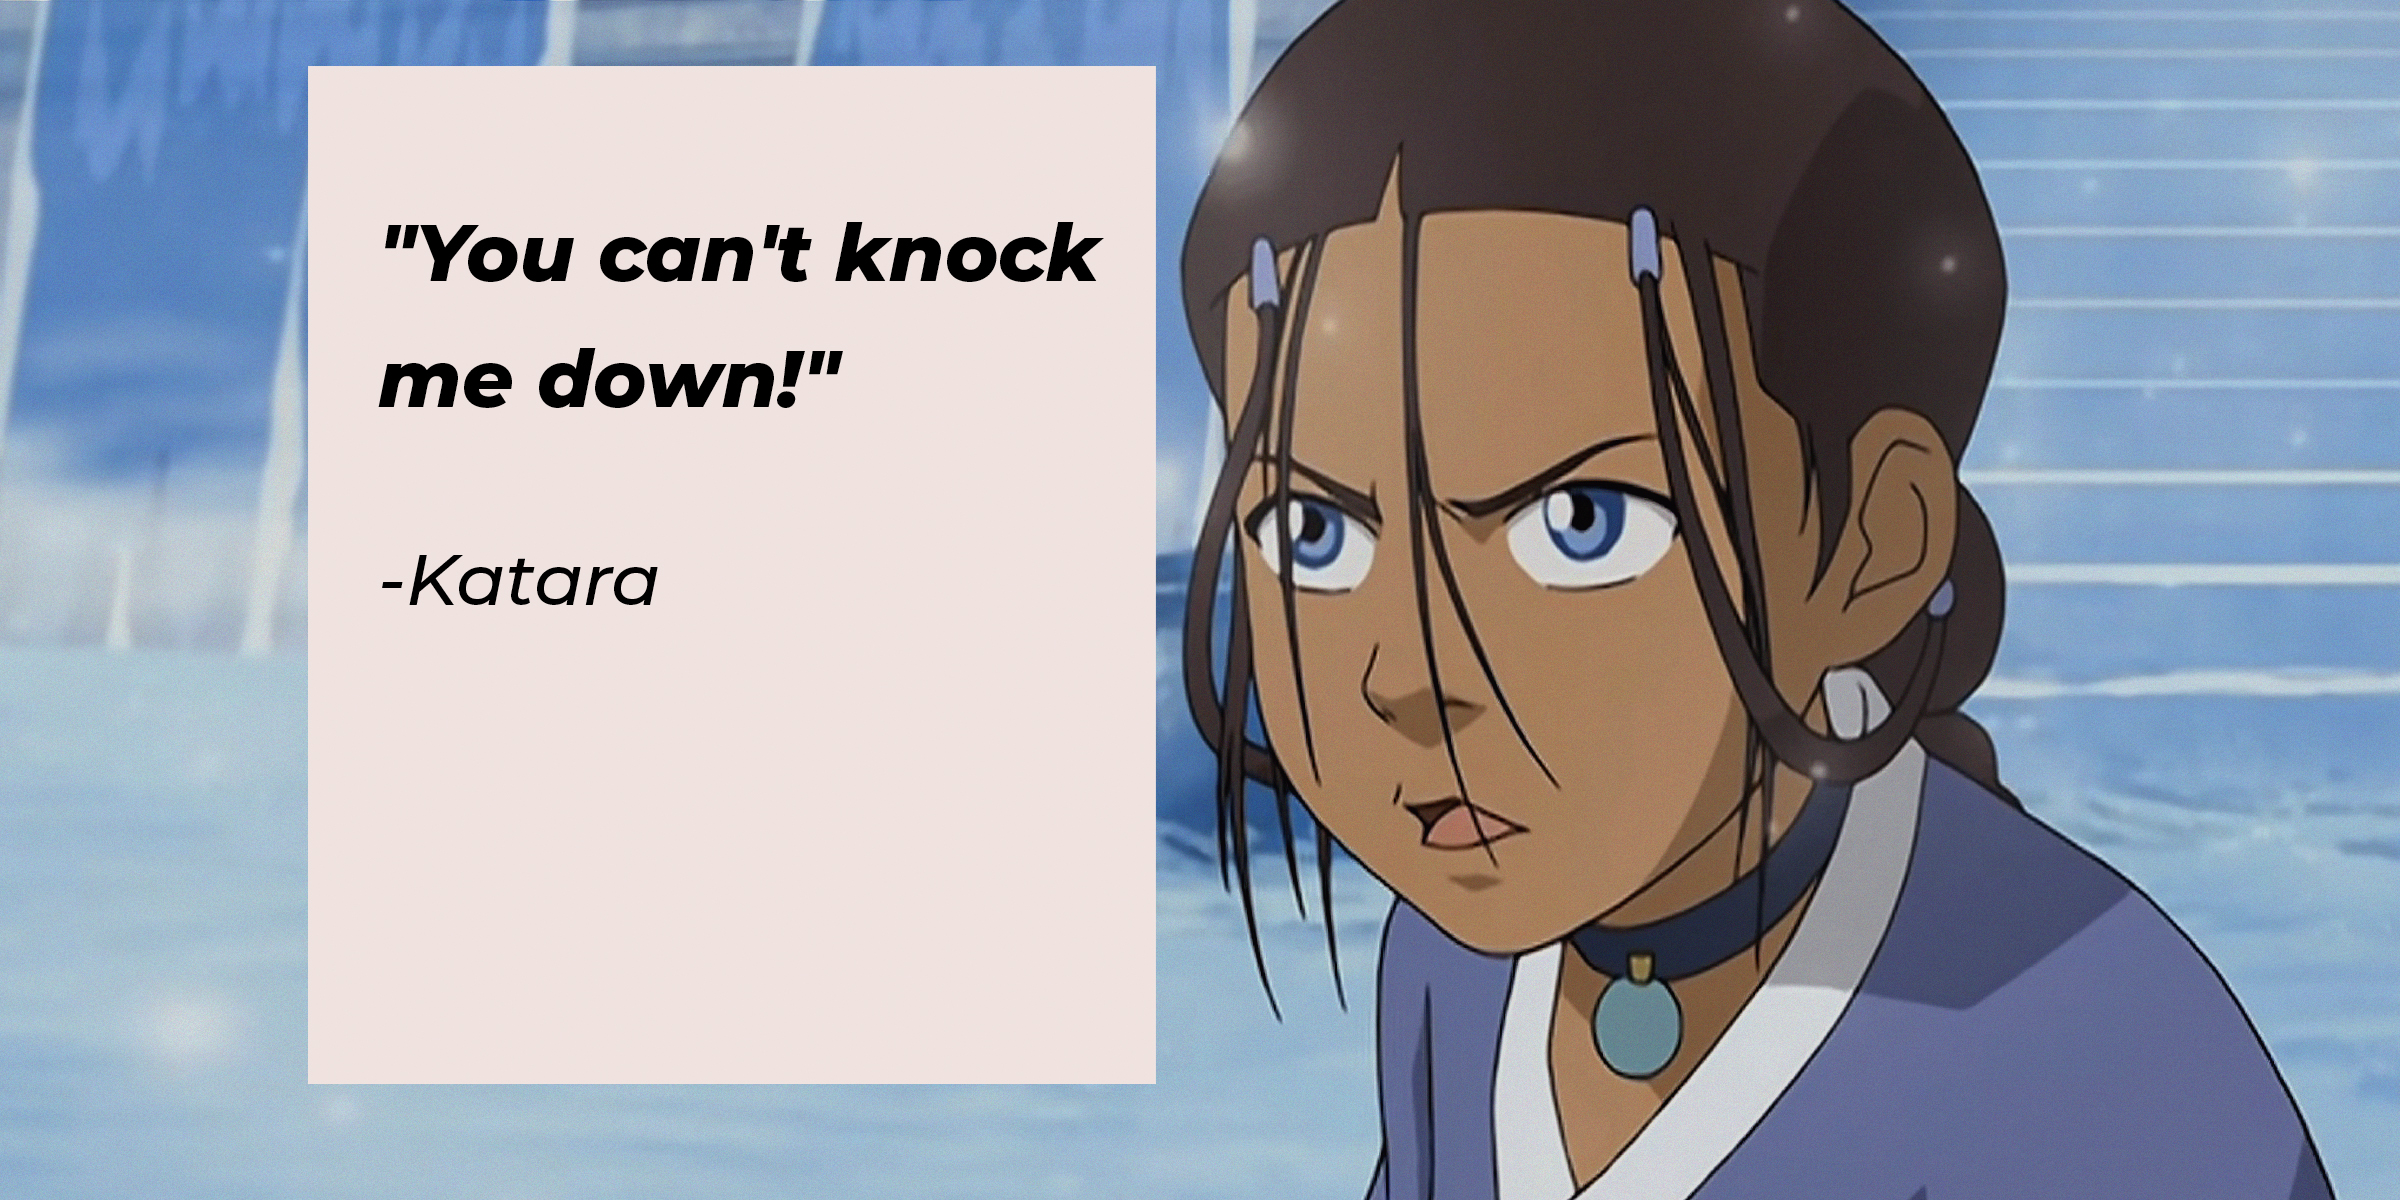 Photo of Katara with the quote: "You can't knock me down!" | Source: Youtube.com/TeamAvatar